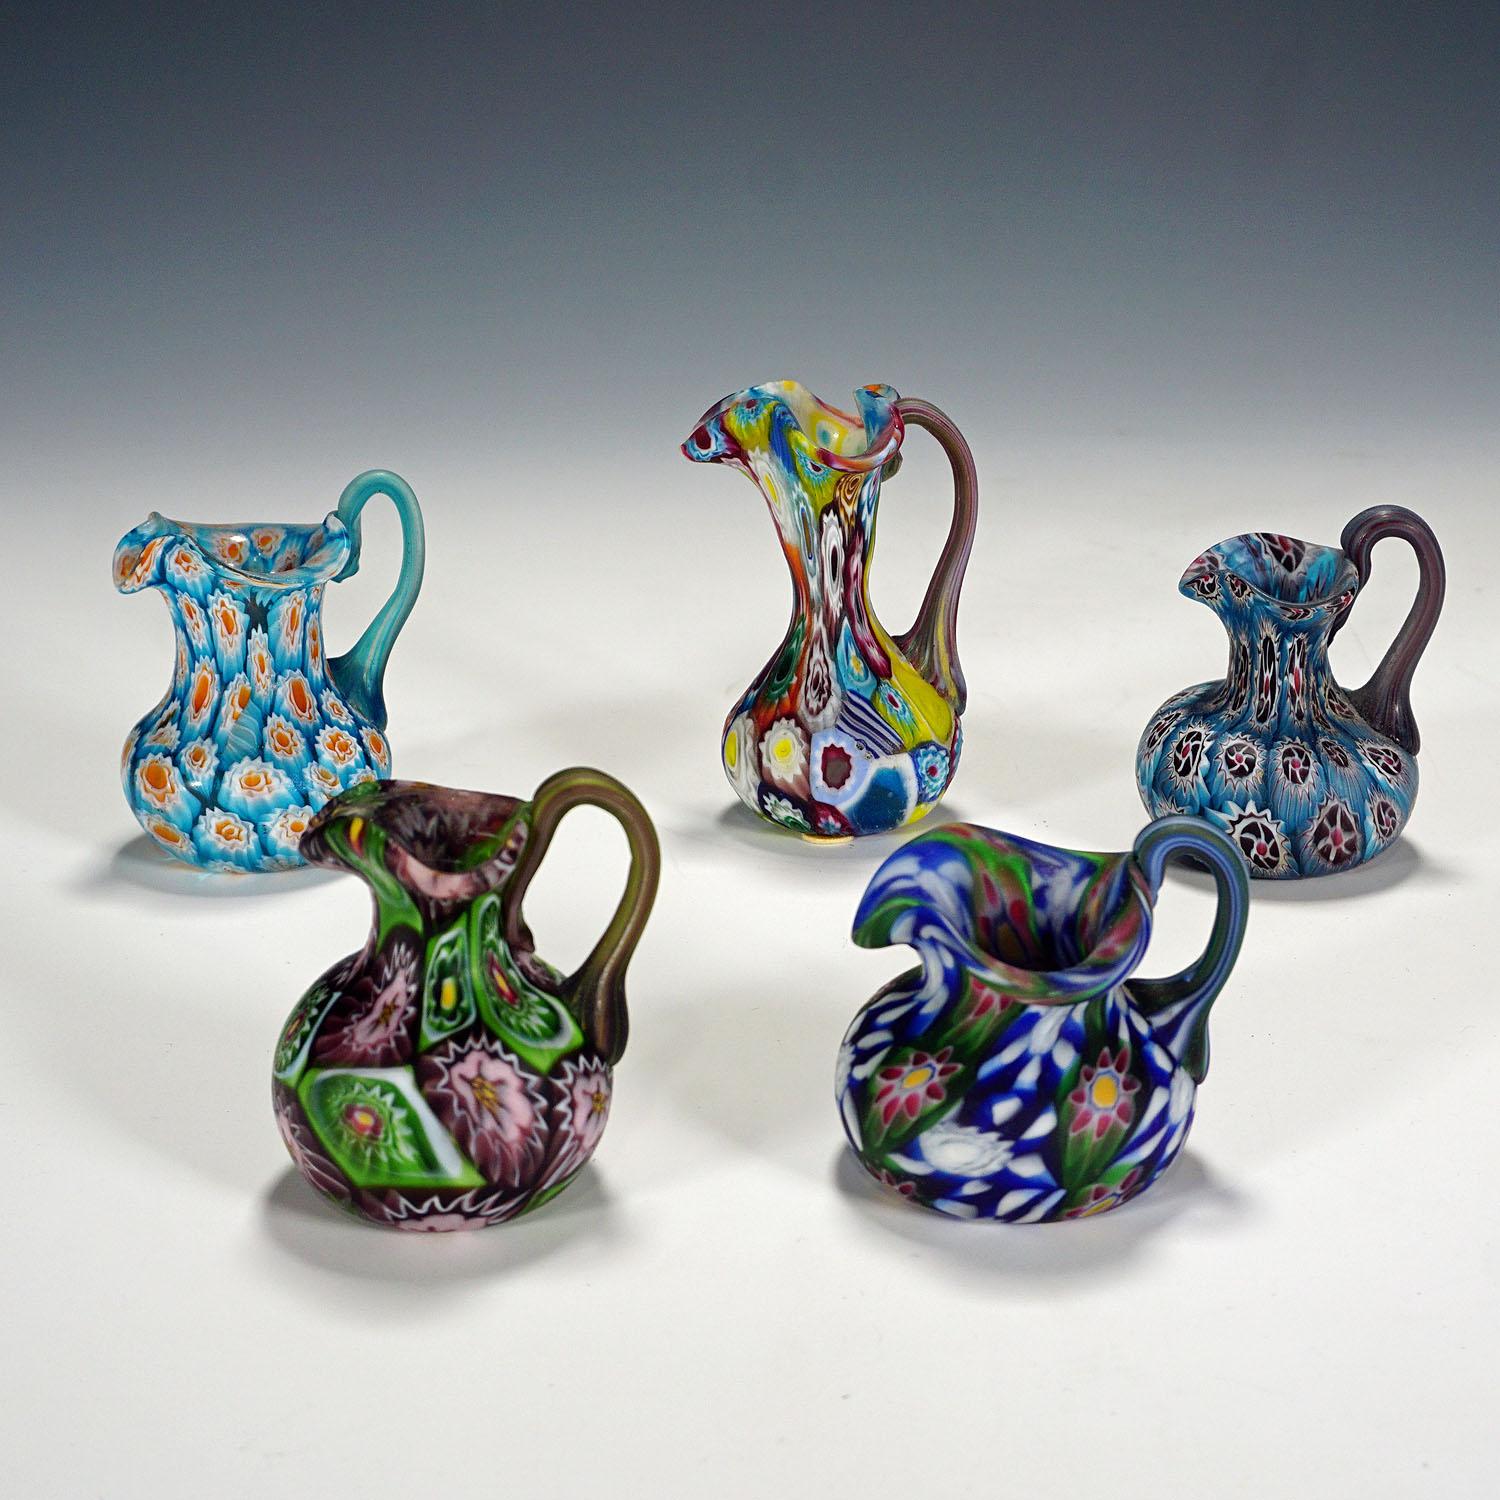 A set of five small murrine glass jugs, manufactured by Vetreria Fratelli Toso around 1910. The jugs are executed with polychrome multicoloured millefiori murrines and have an acid etched matte finish. They are authentic examples of early 20th